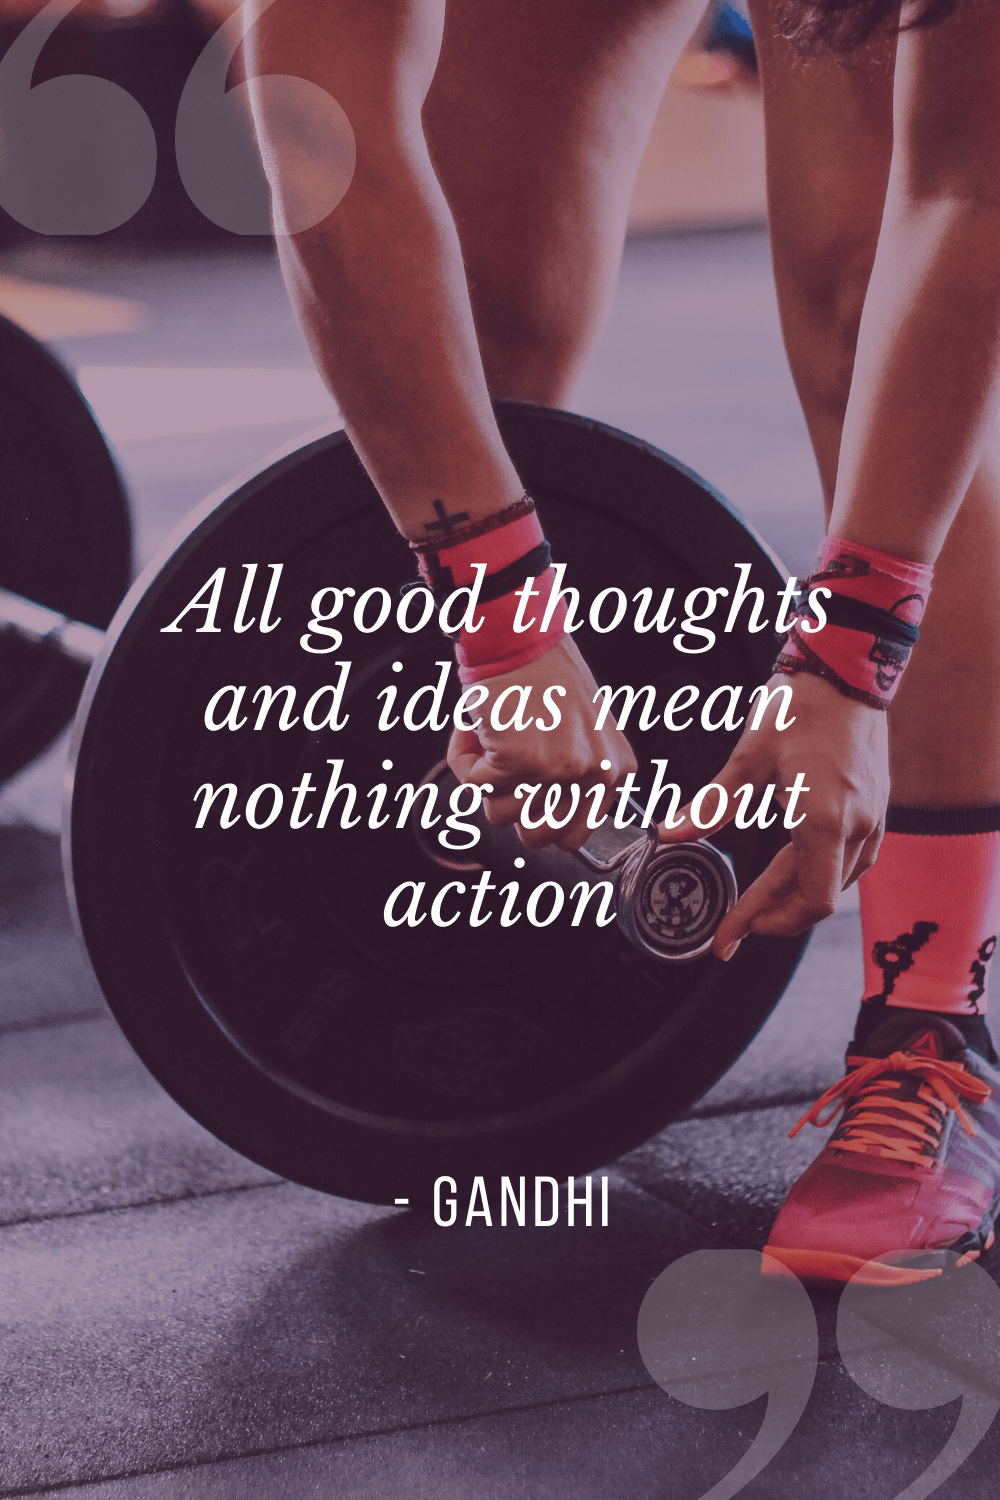 “All good thoughts and ideas mean nothing without action”, Gandhi